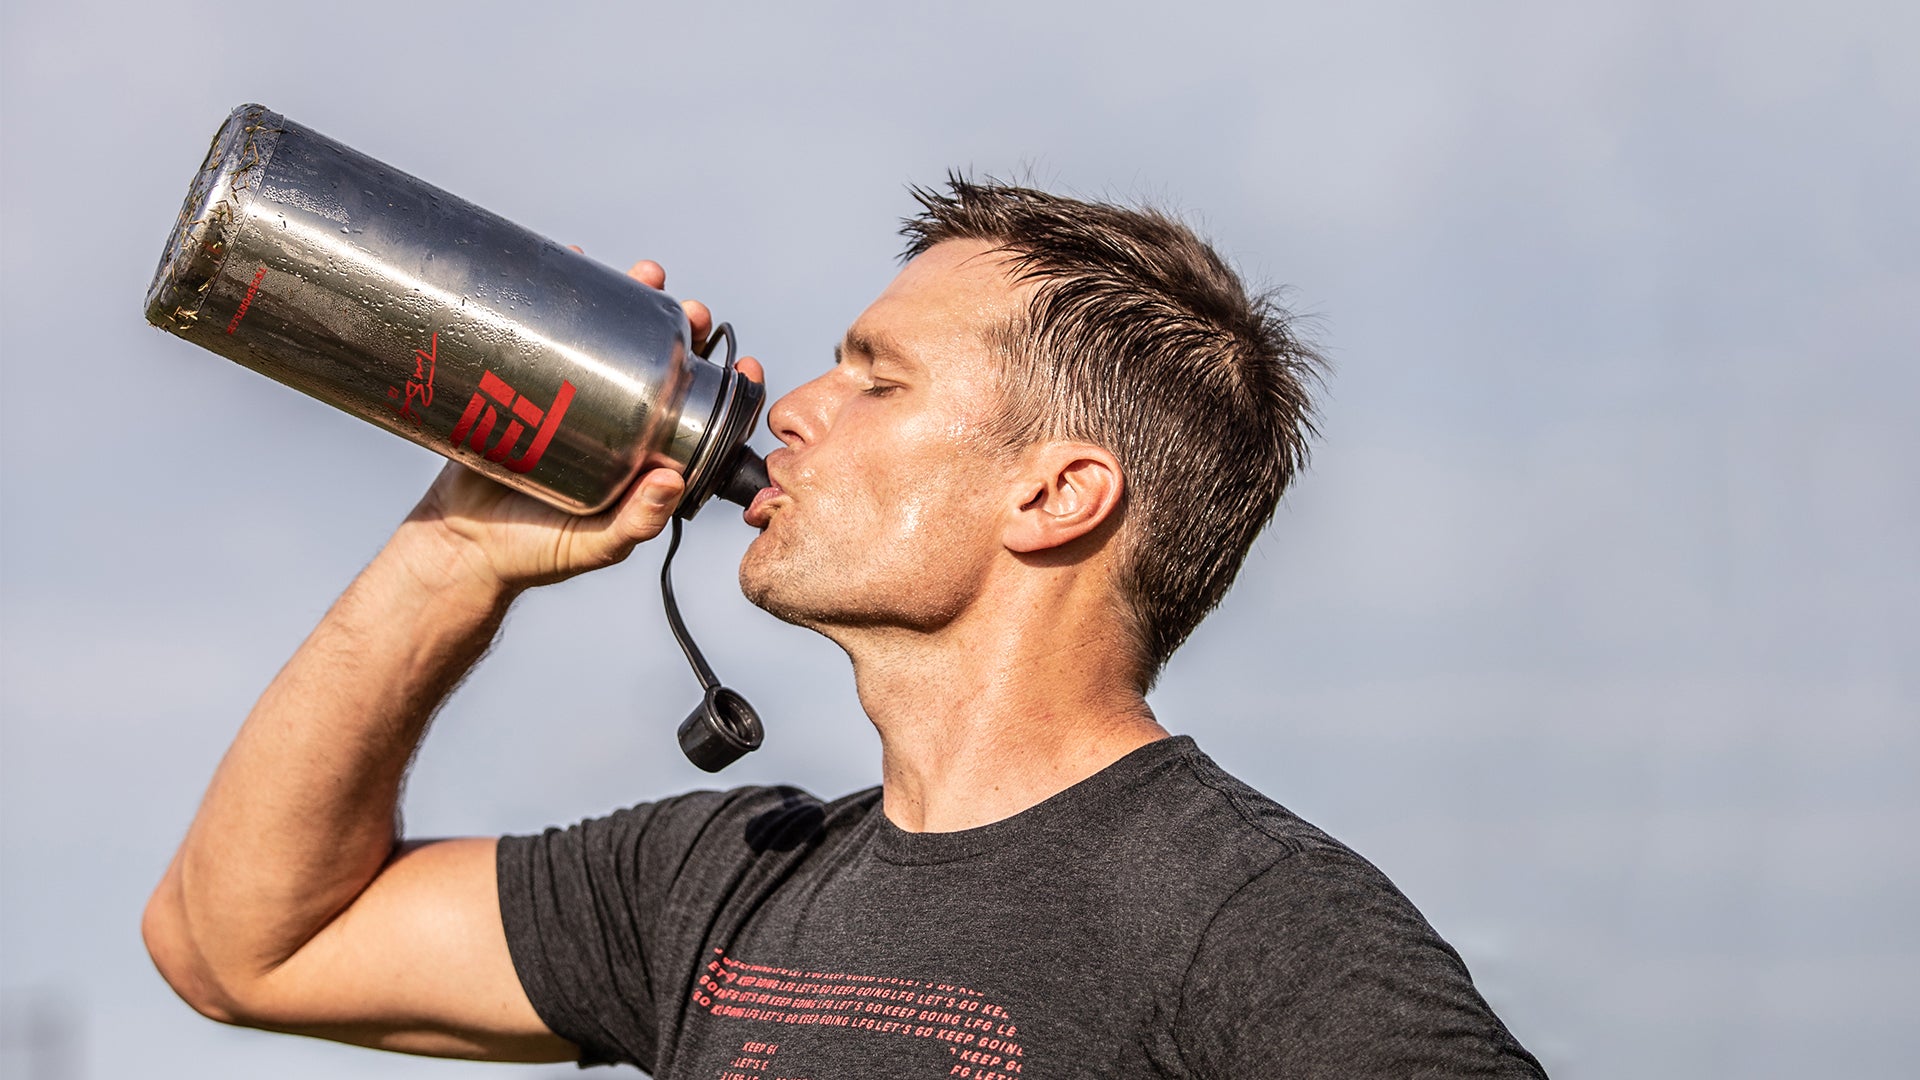 Retired Tom Brady’s New Goal: Become World’s Most Hydrated Man